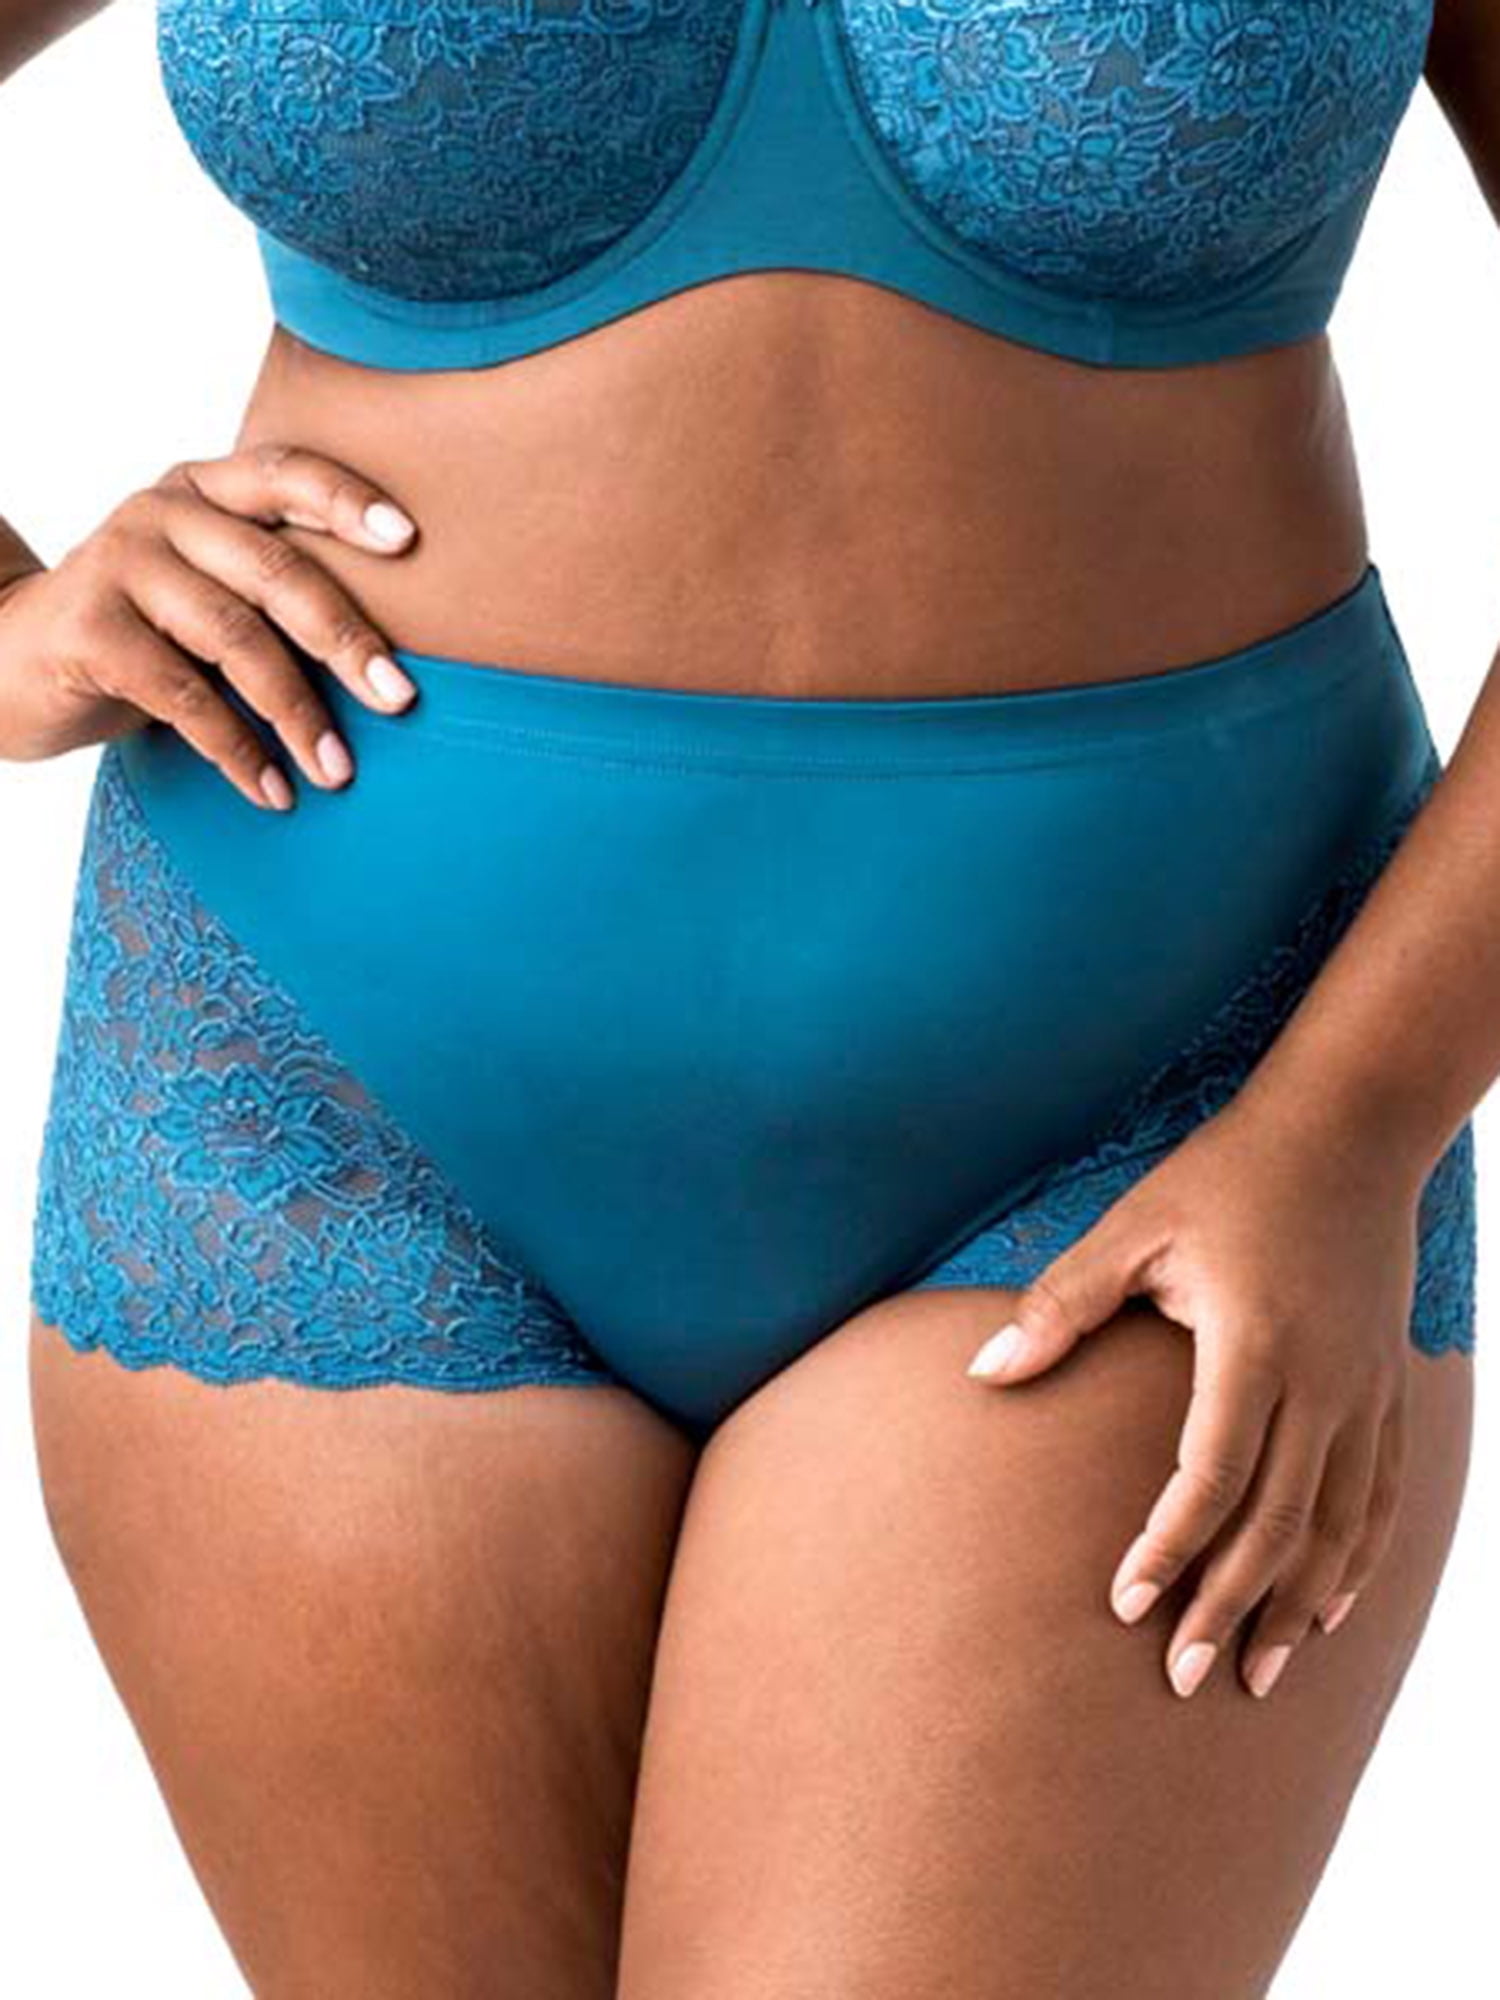 Elila Stretch Lace Cheeky Full Panty (3311)- Teal - Breakout Bras